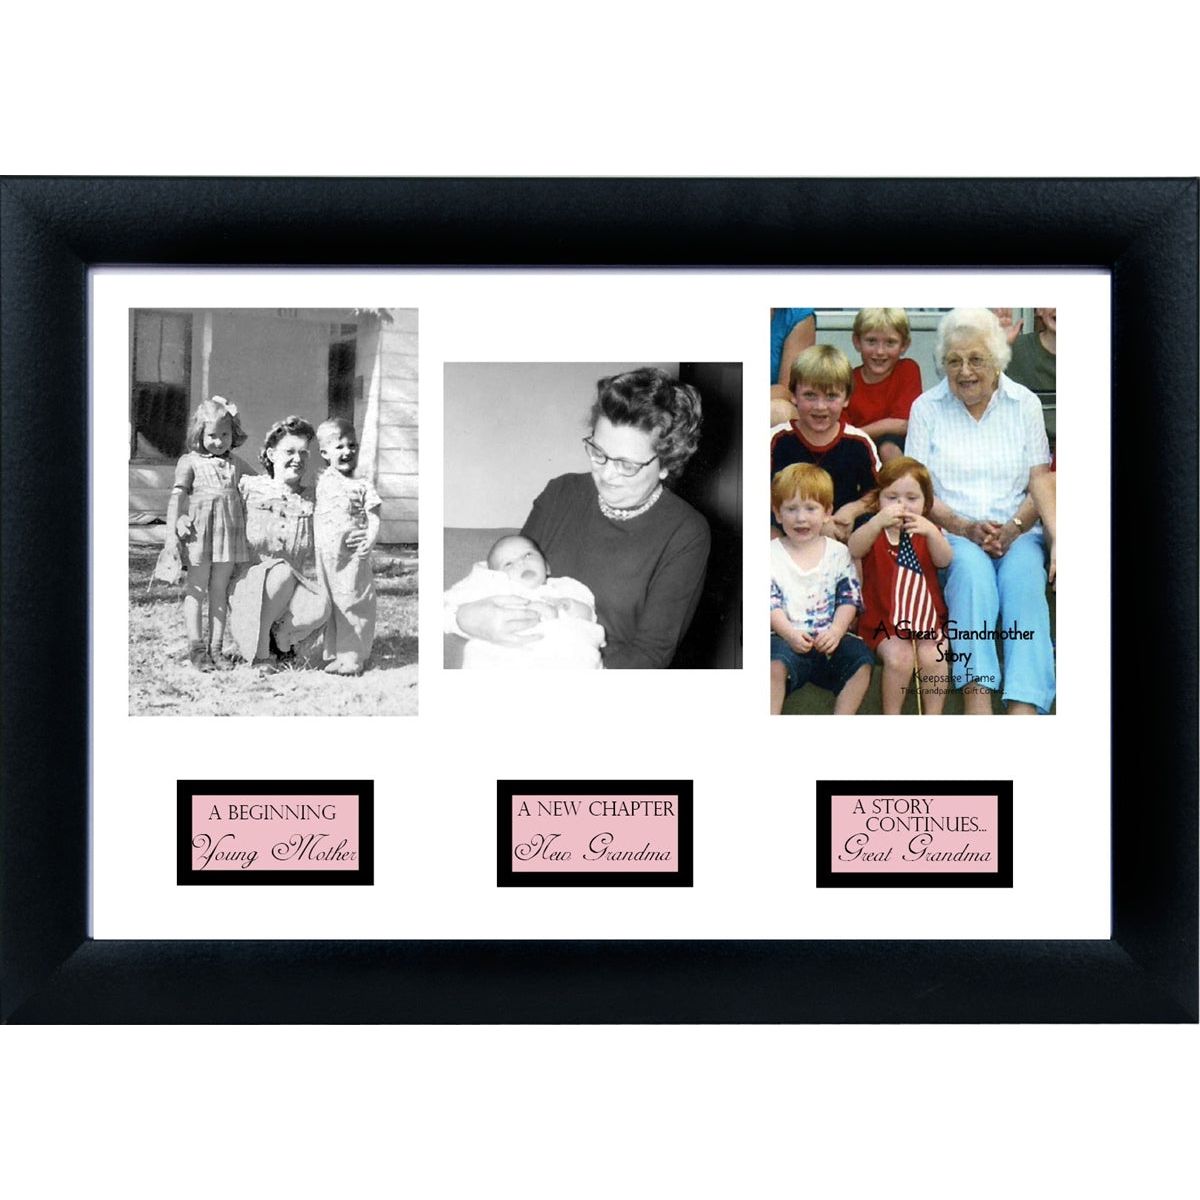 8x12 black frame for wall or table display with 3 spaces and captions for photos for a Great-Grandma's life story.